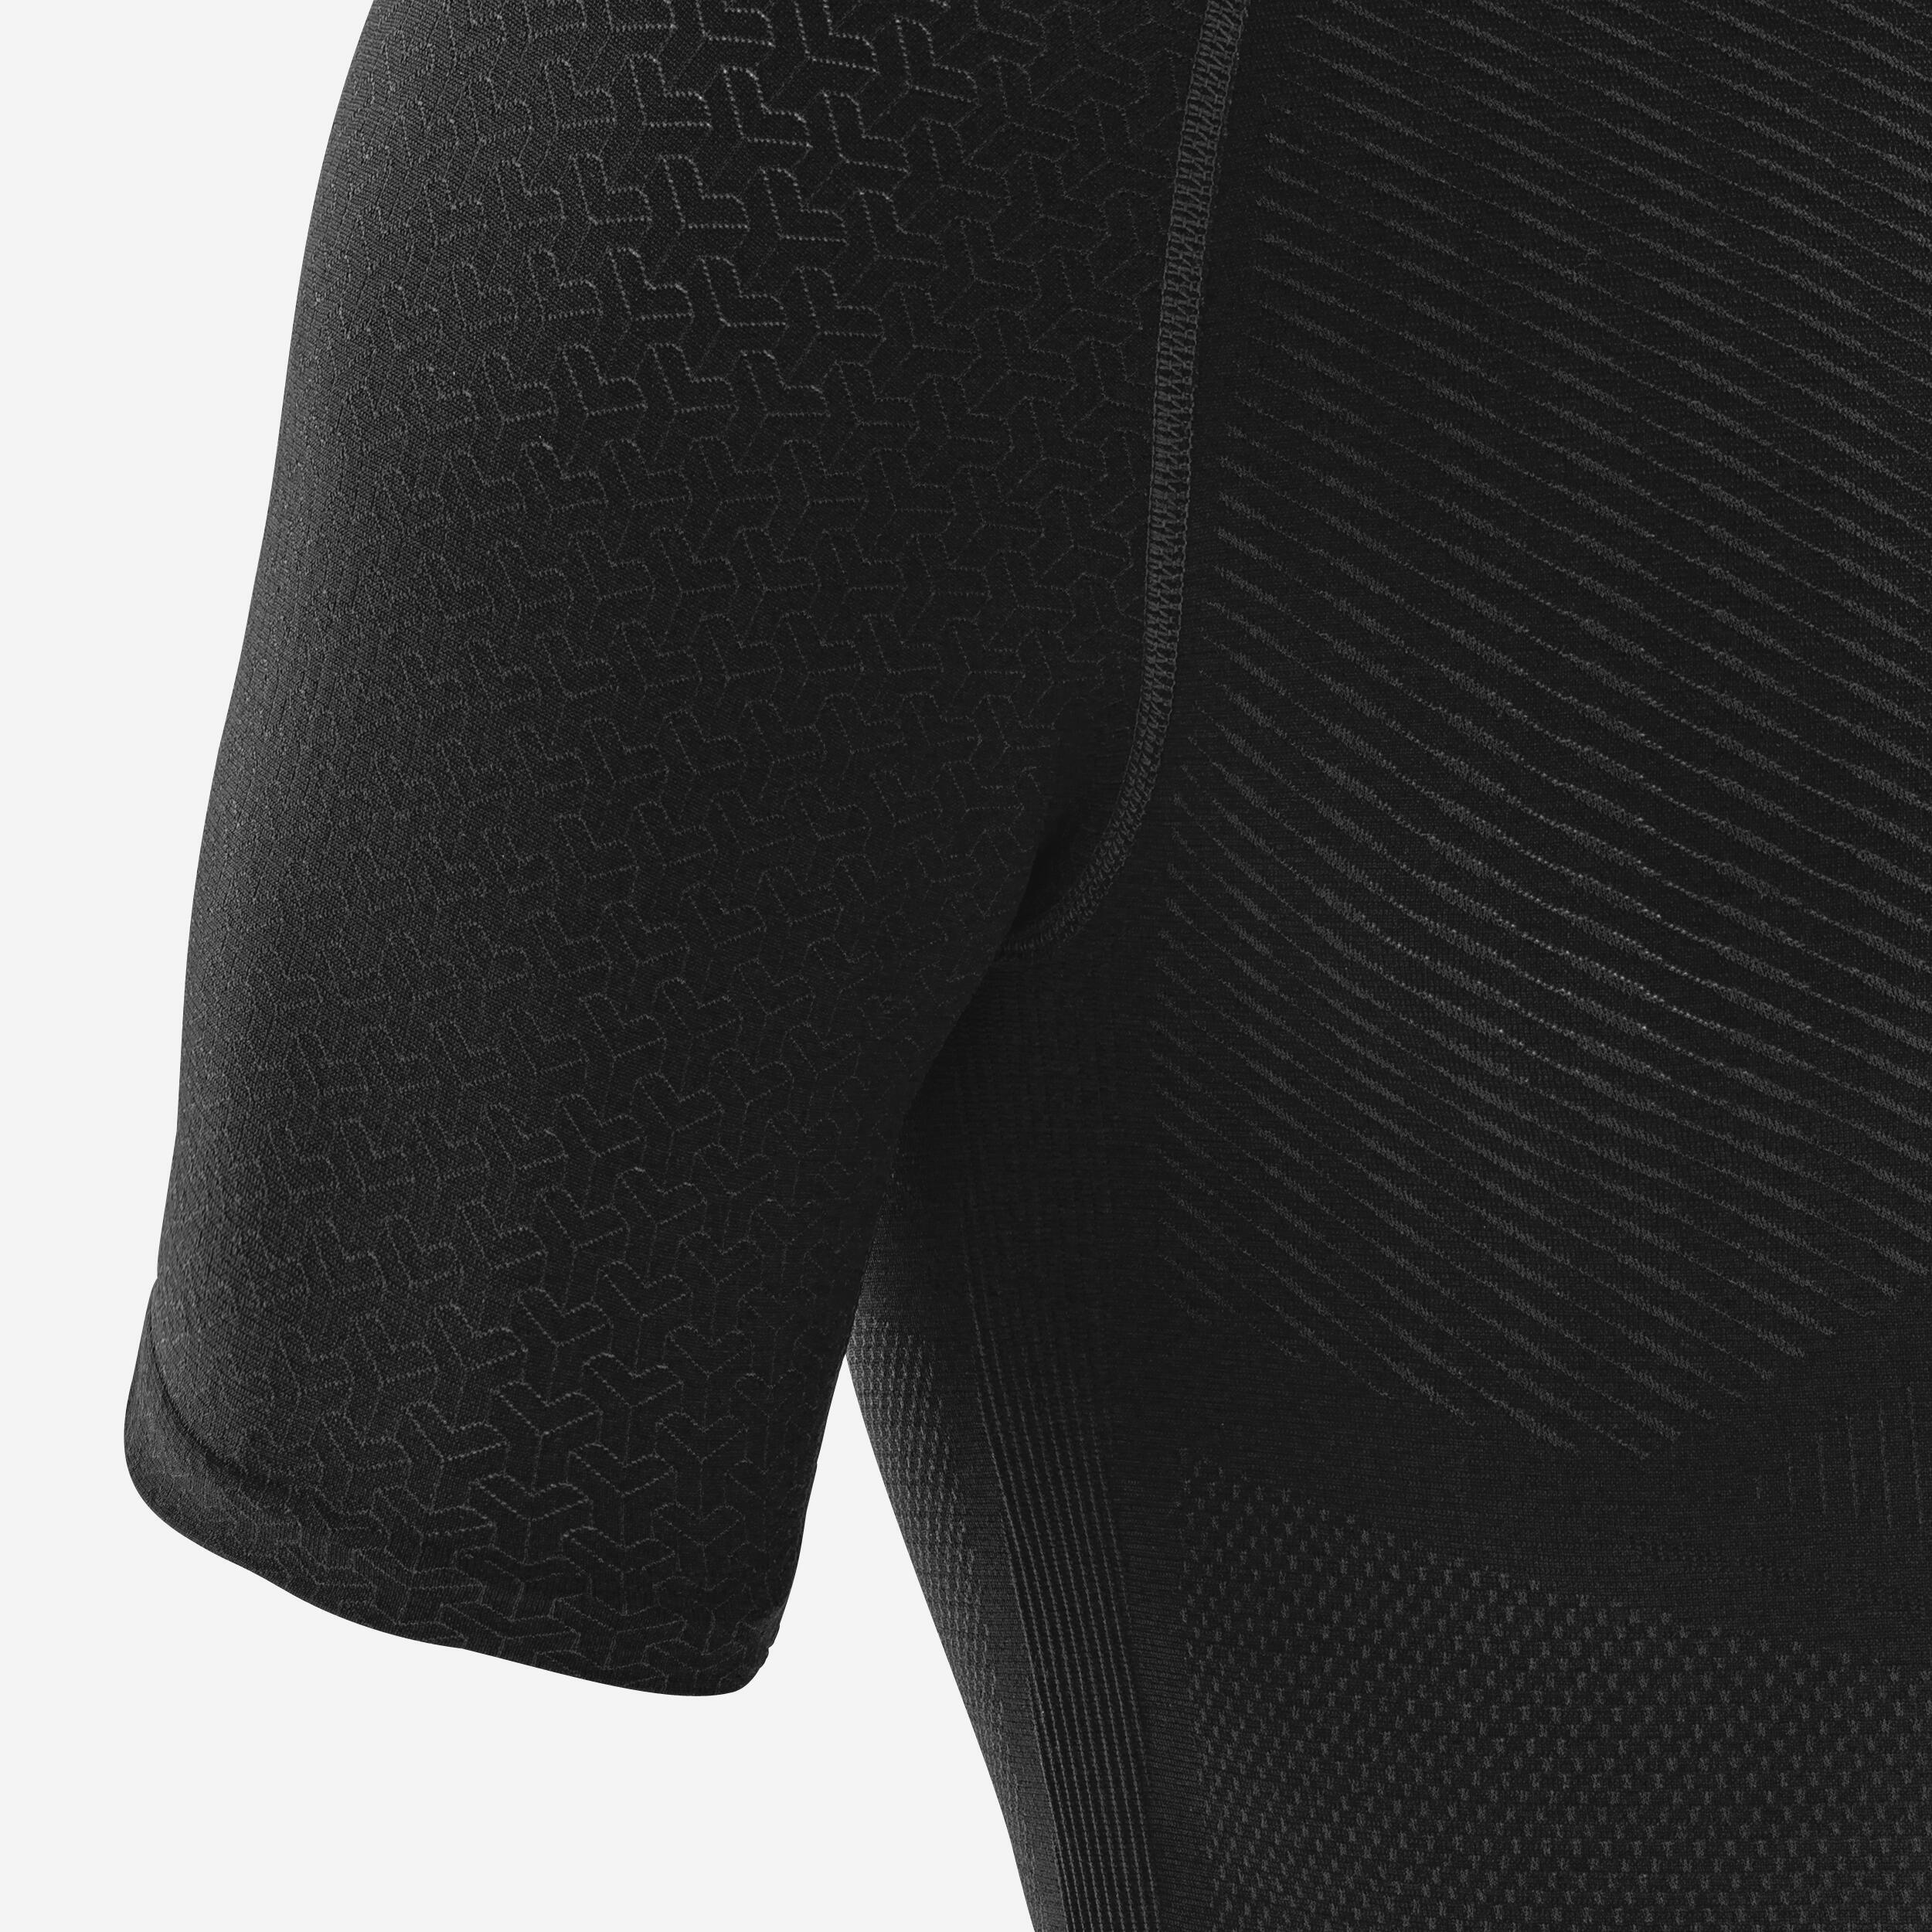 Adult Short-Sleeved Thermal Base Layer Top Keepdry 500 - Black 6/6